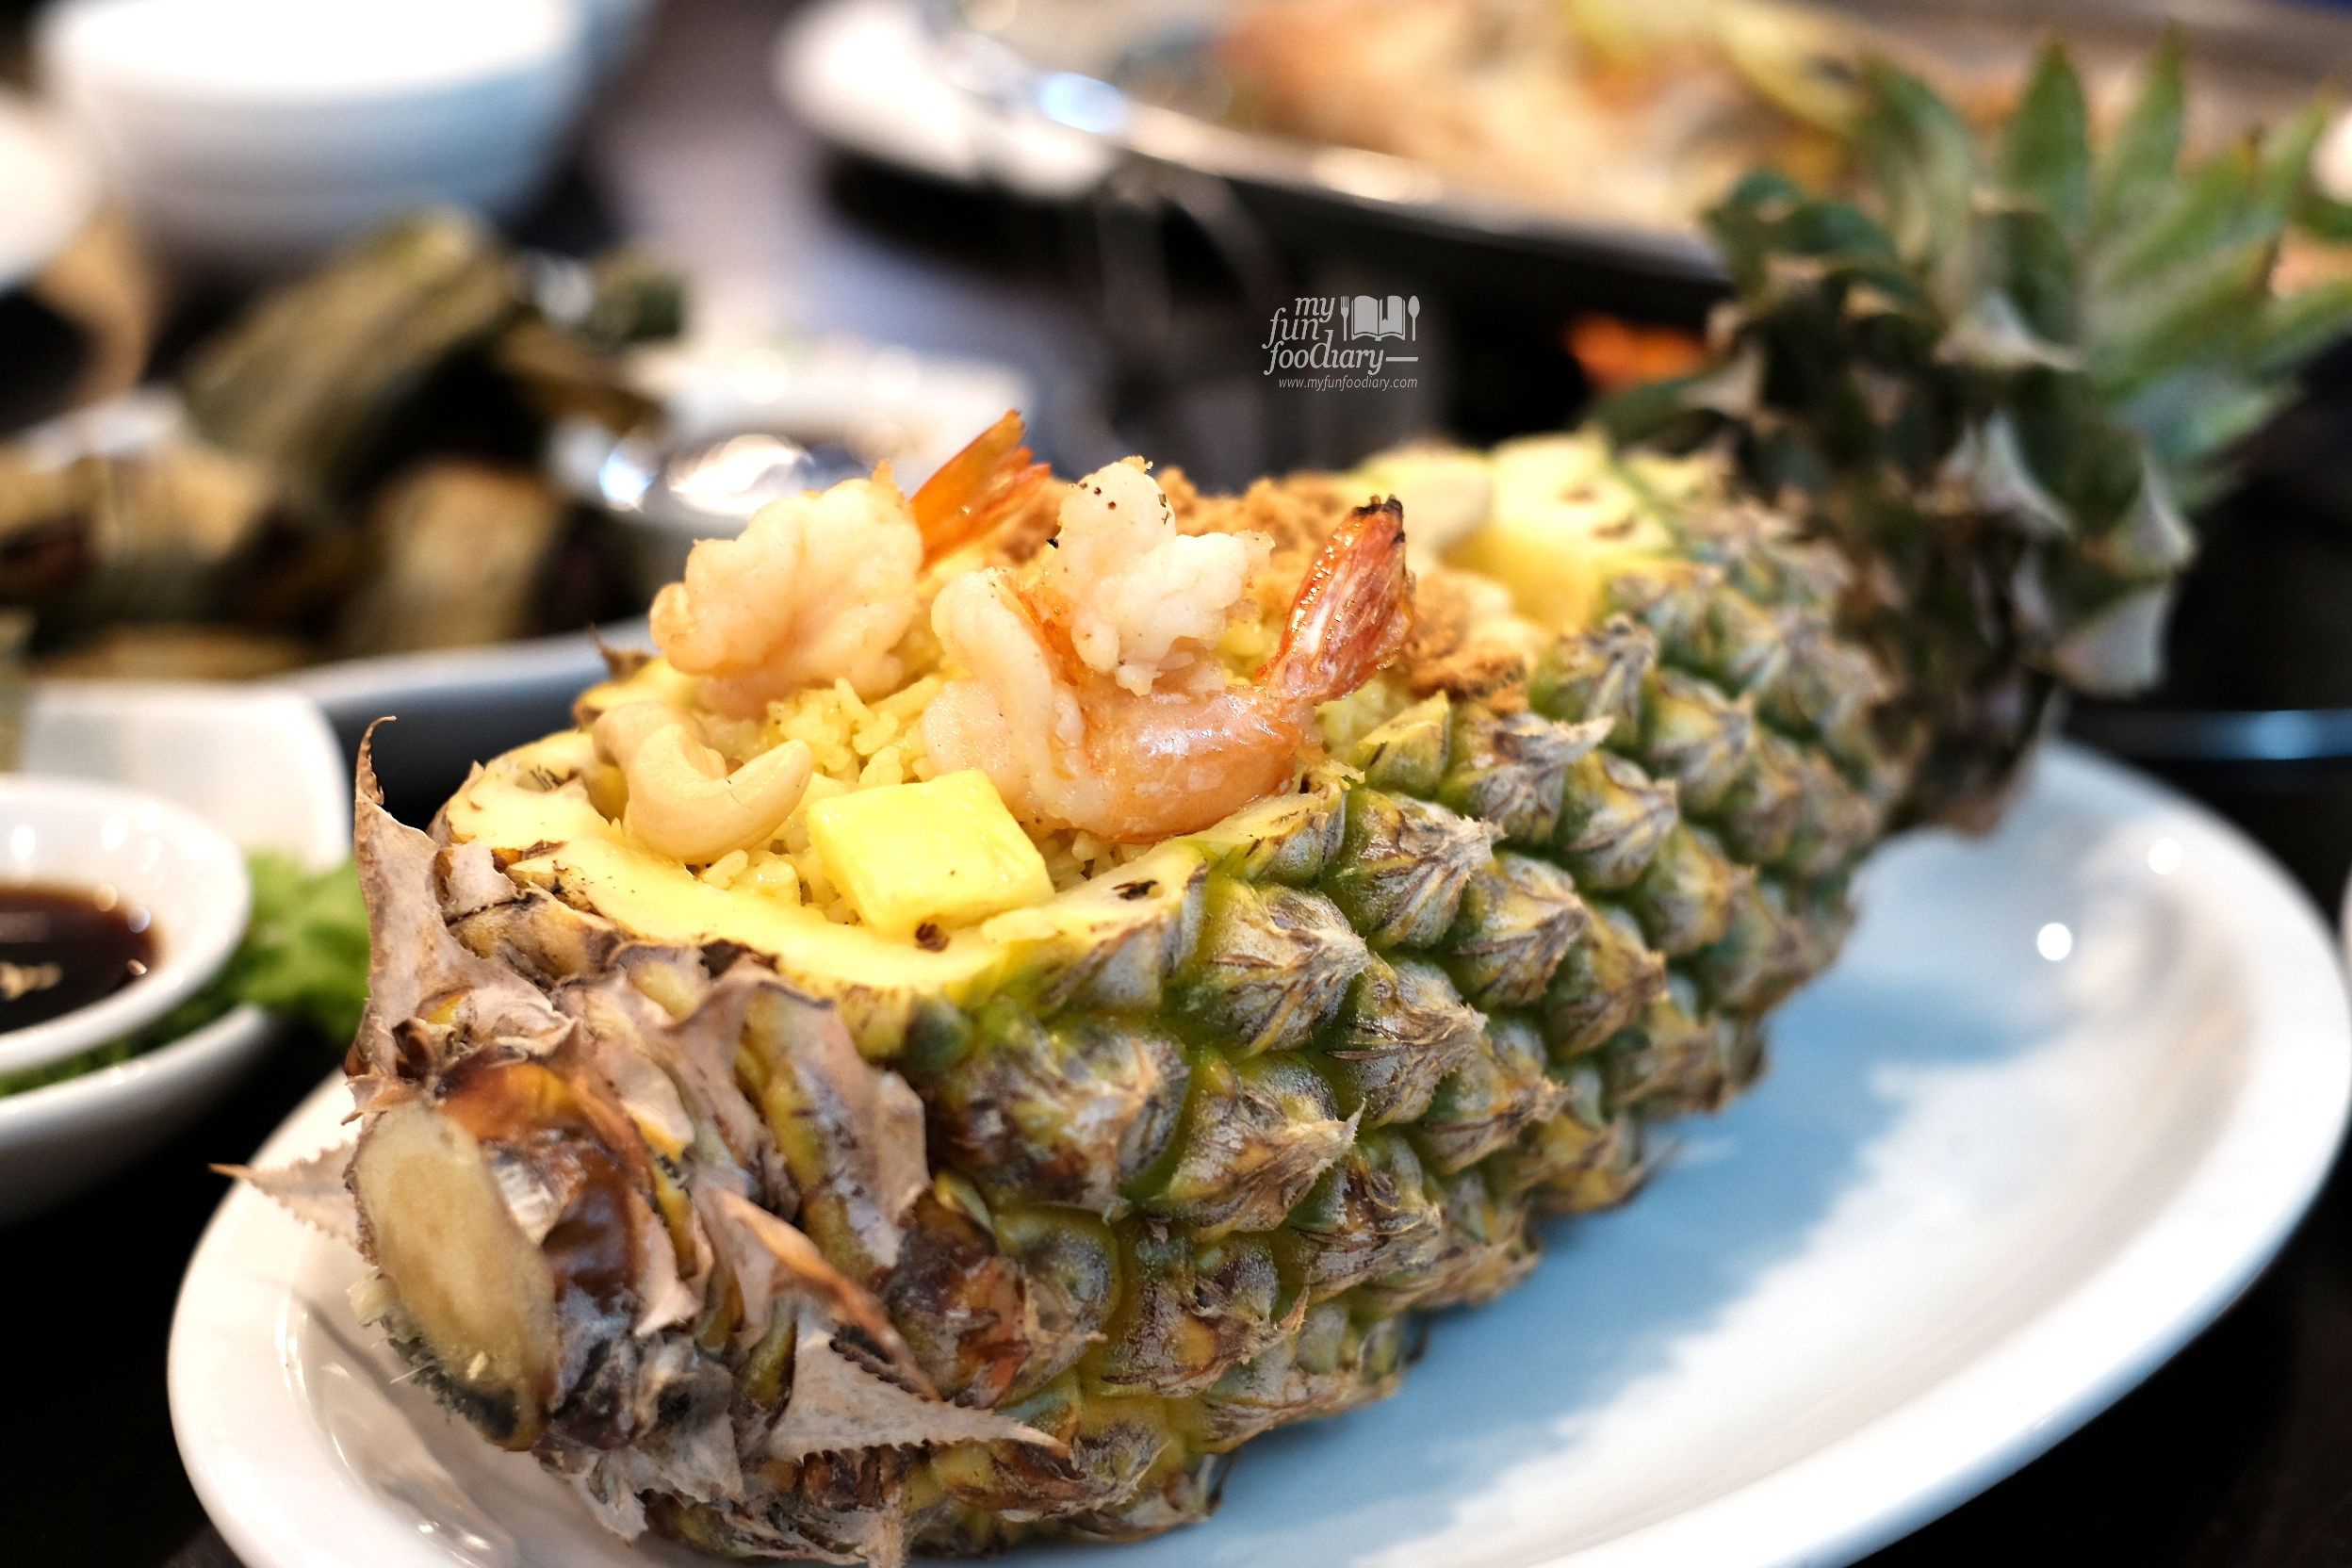 Pineapple Fried Rice at Thai Chada by Myfunfoodiary 01